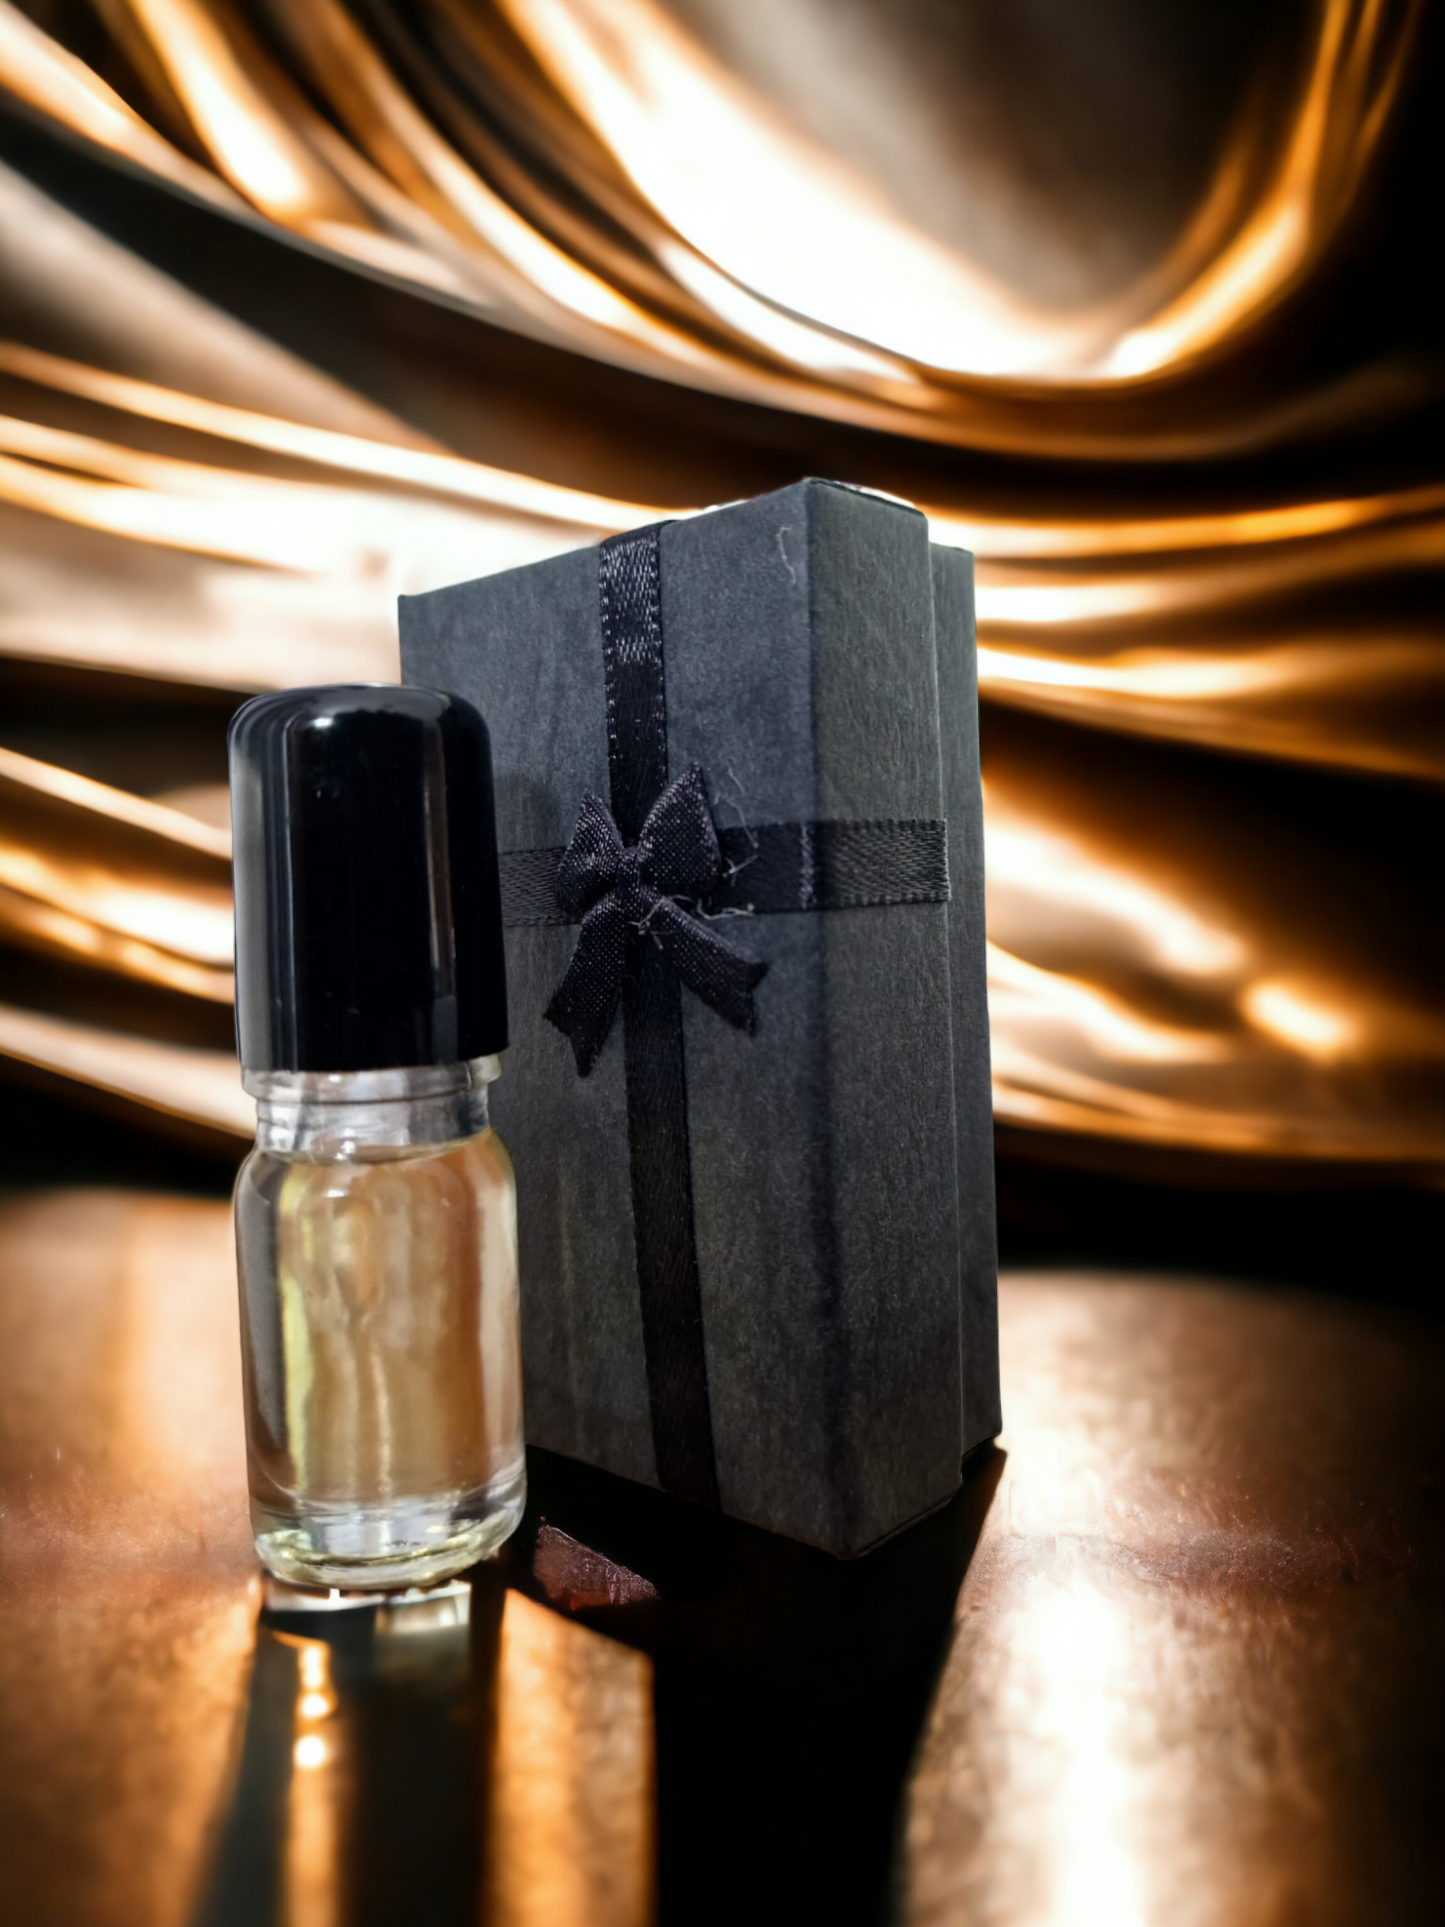 Blend No.10 Ispahan by Livfragrance® Pure Oud Oil - Inspired by Dior Oud Ispahan